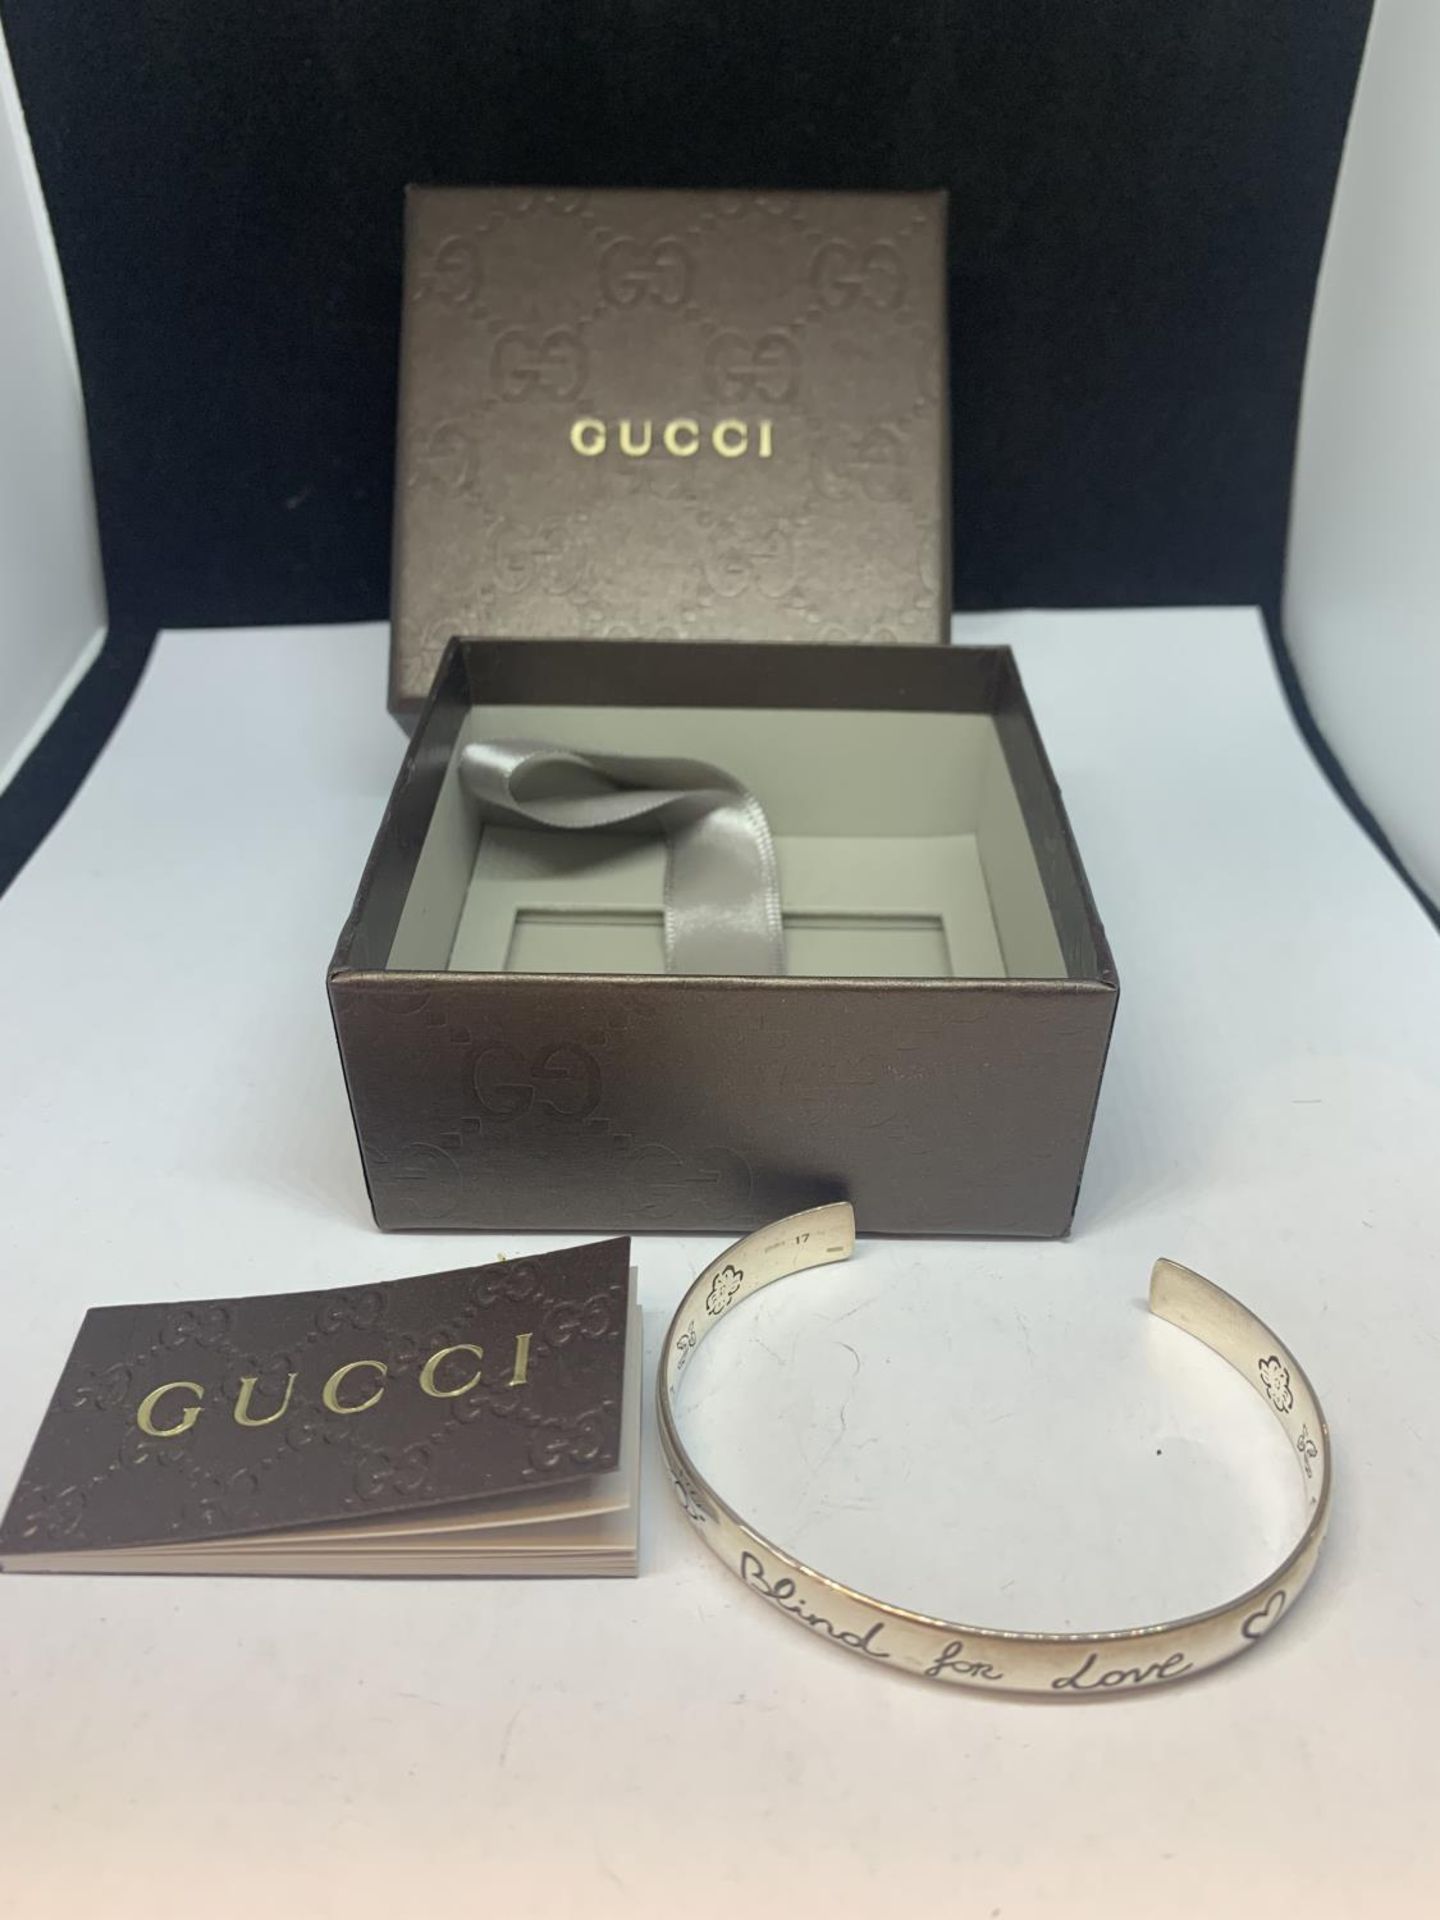 A GUCCI BLIND FOR LOVE BANGLE WITH A PRESENTATION BOX - Image 2 of 6